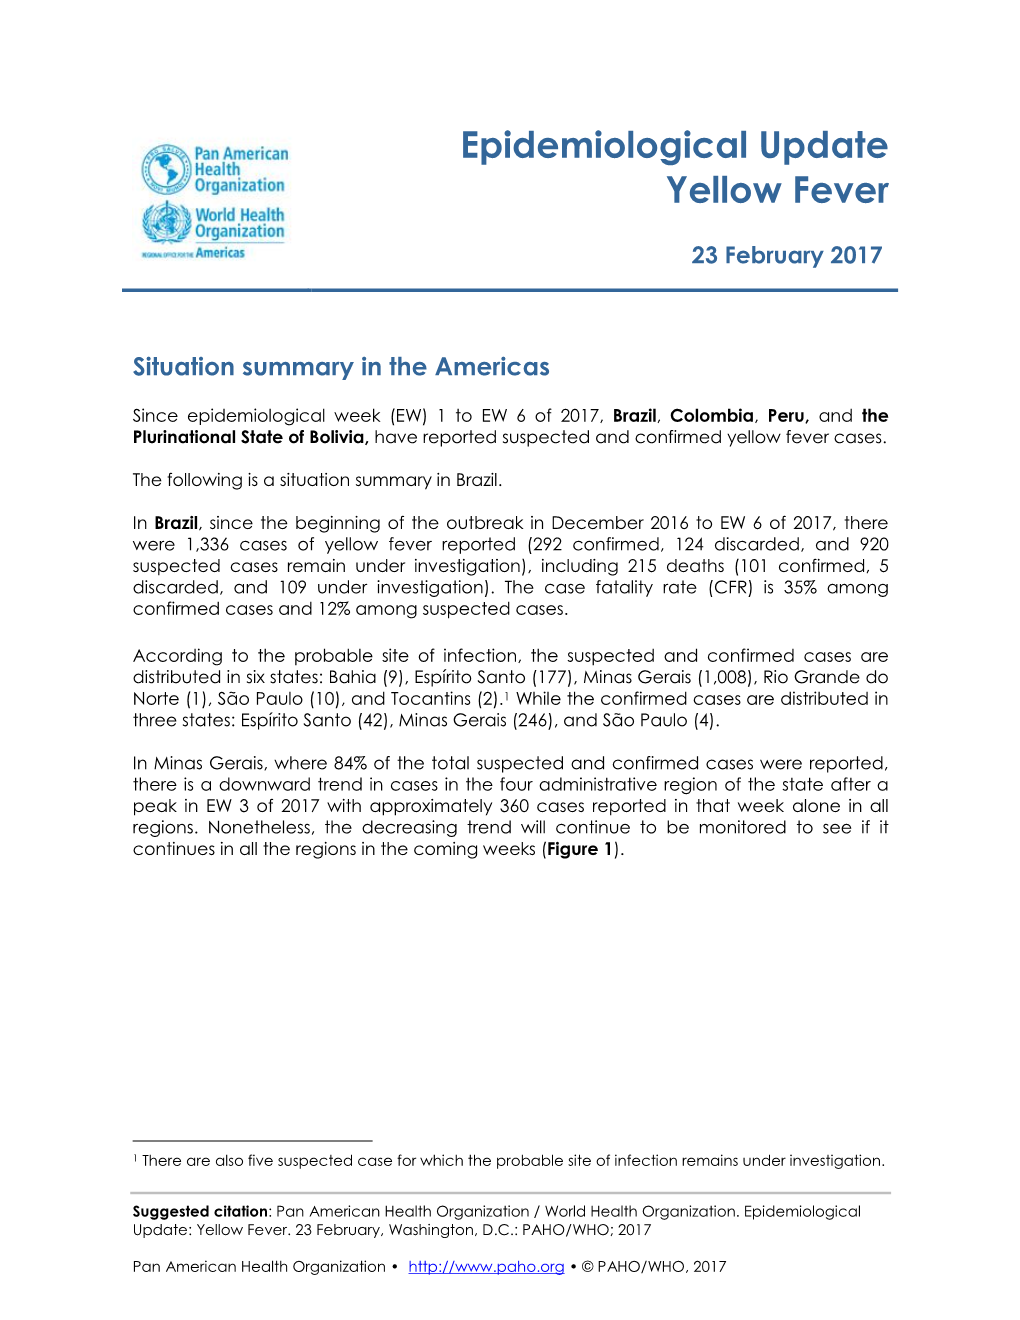 Epidemiological Update Yellow Fever